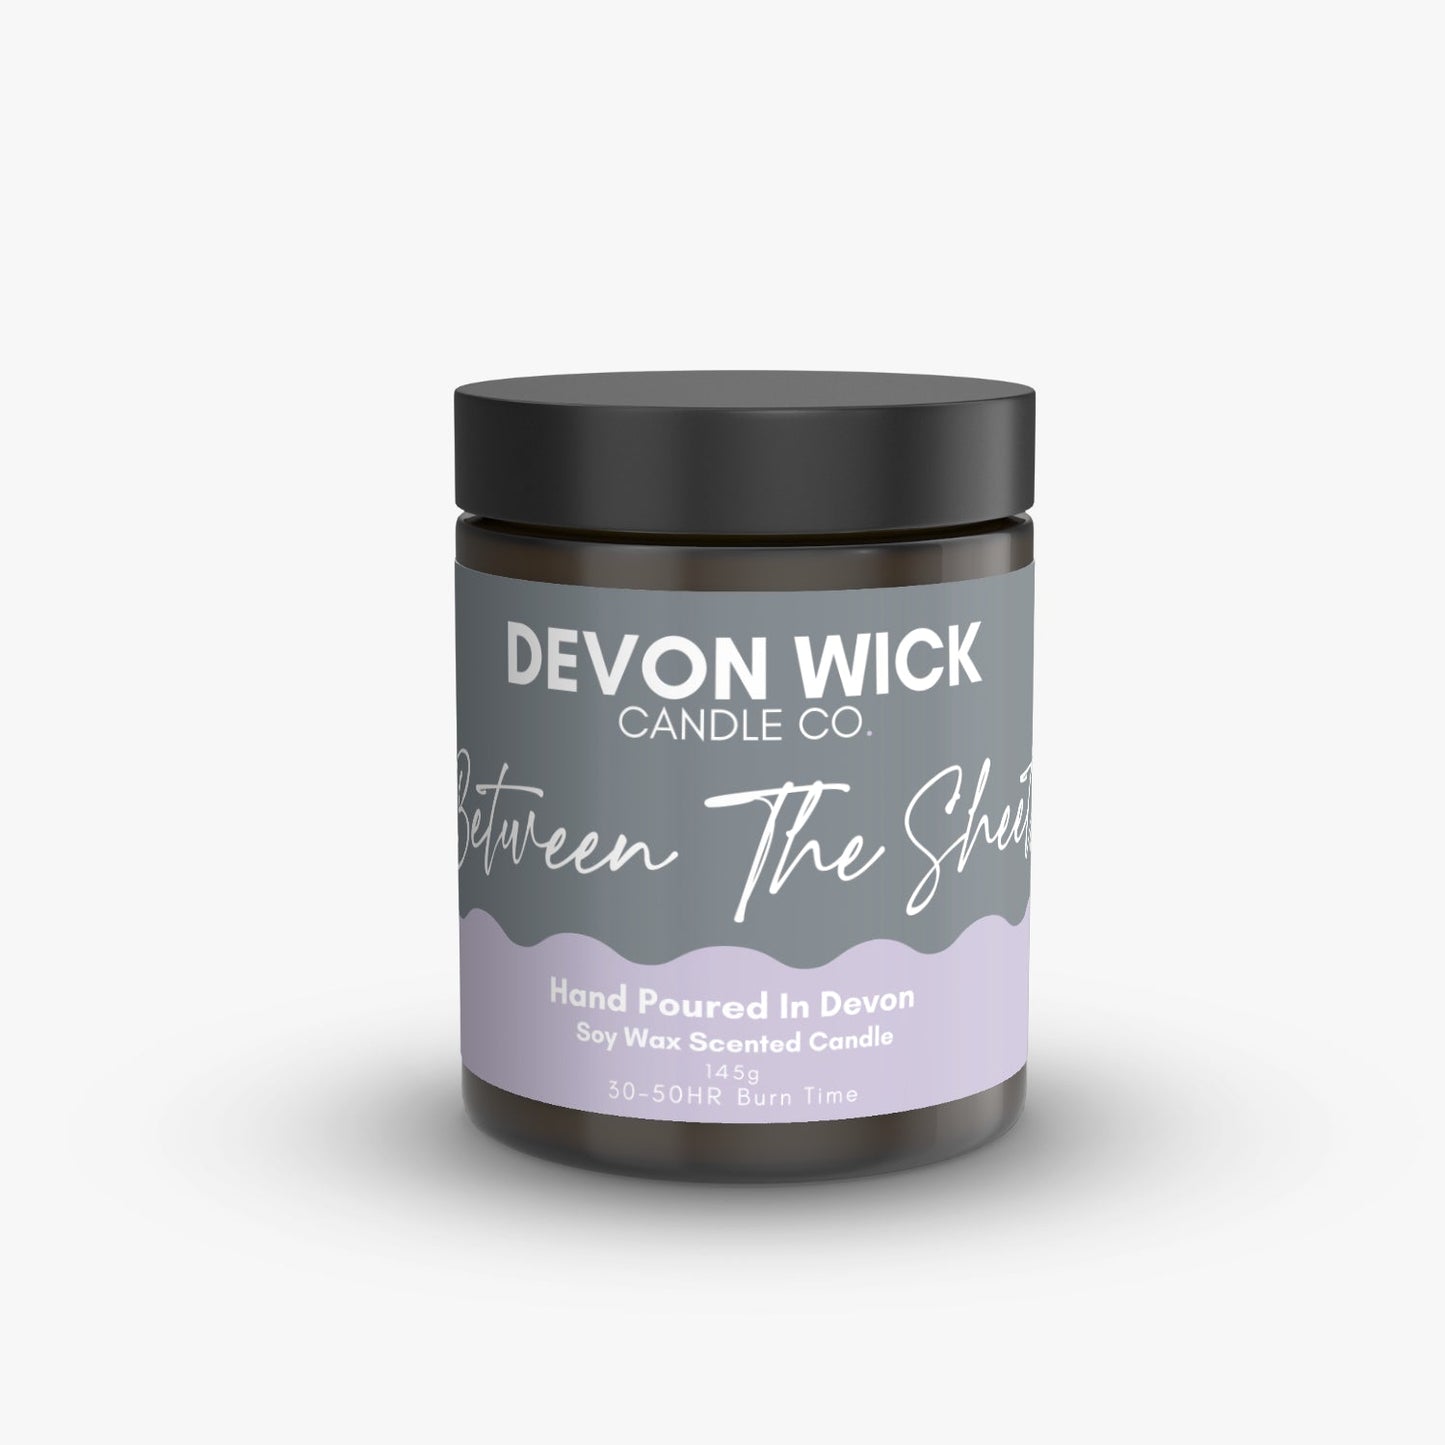 Devon Wick Candle Co. Limited Between The Sheets Soy Wax Candle